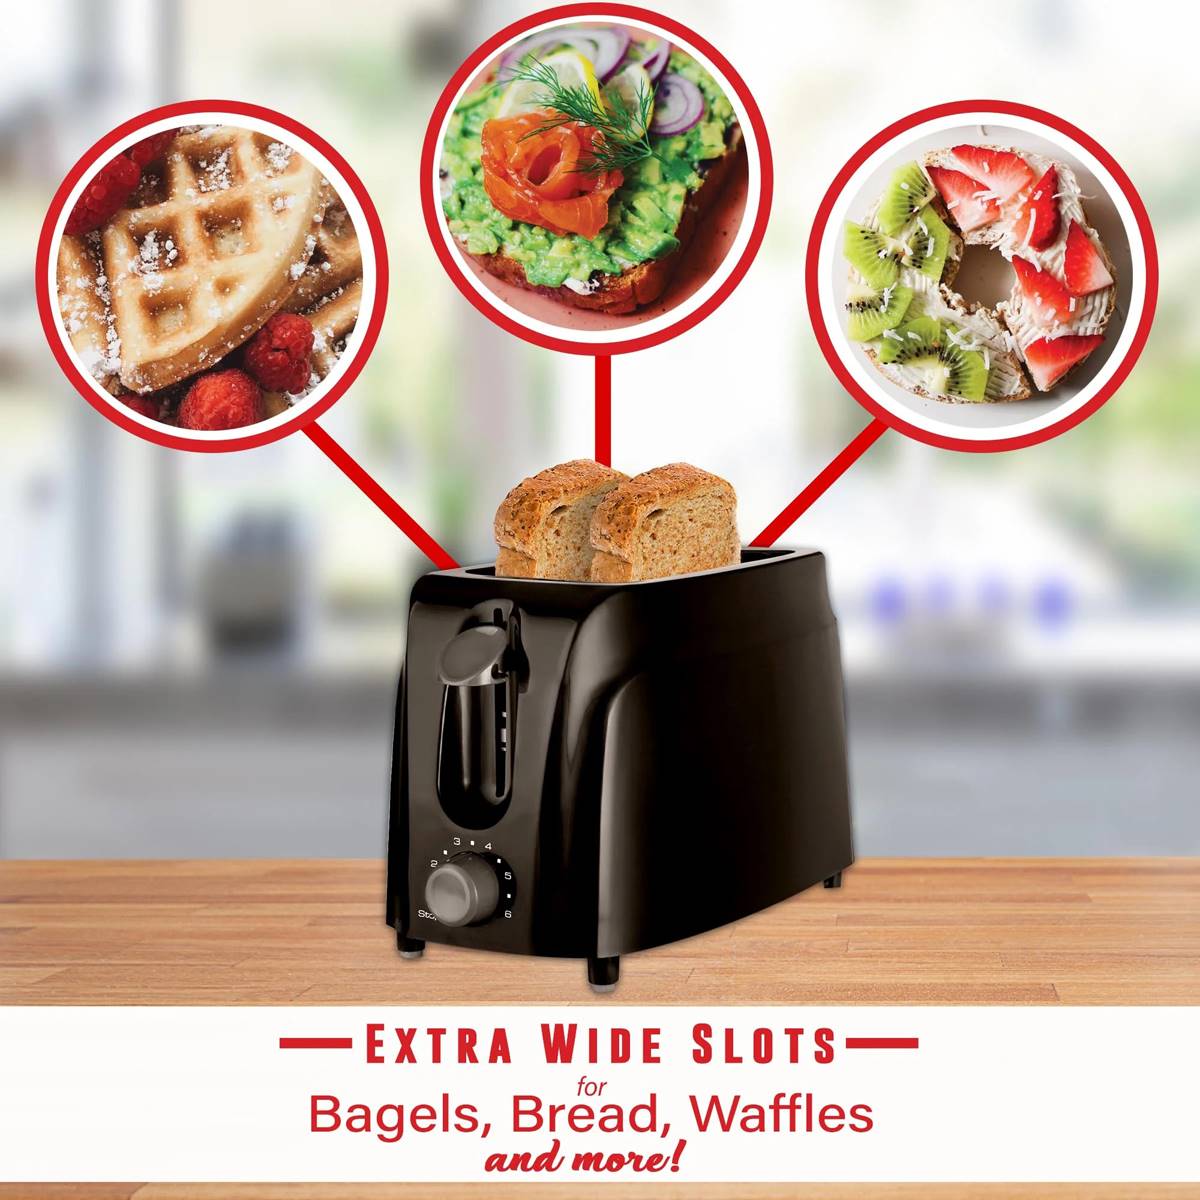 Brentwood(R) 2 Slice Cool Touch Toaster